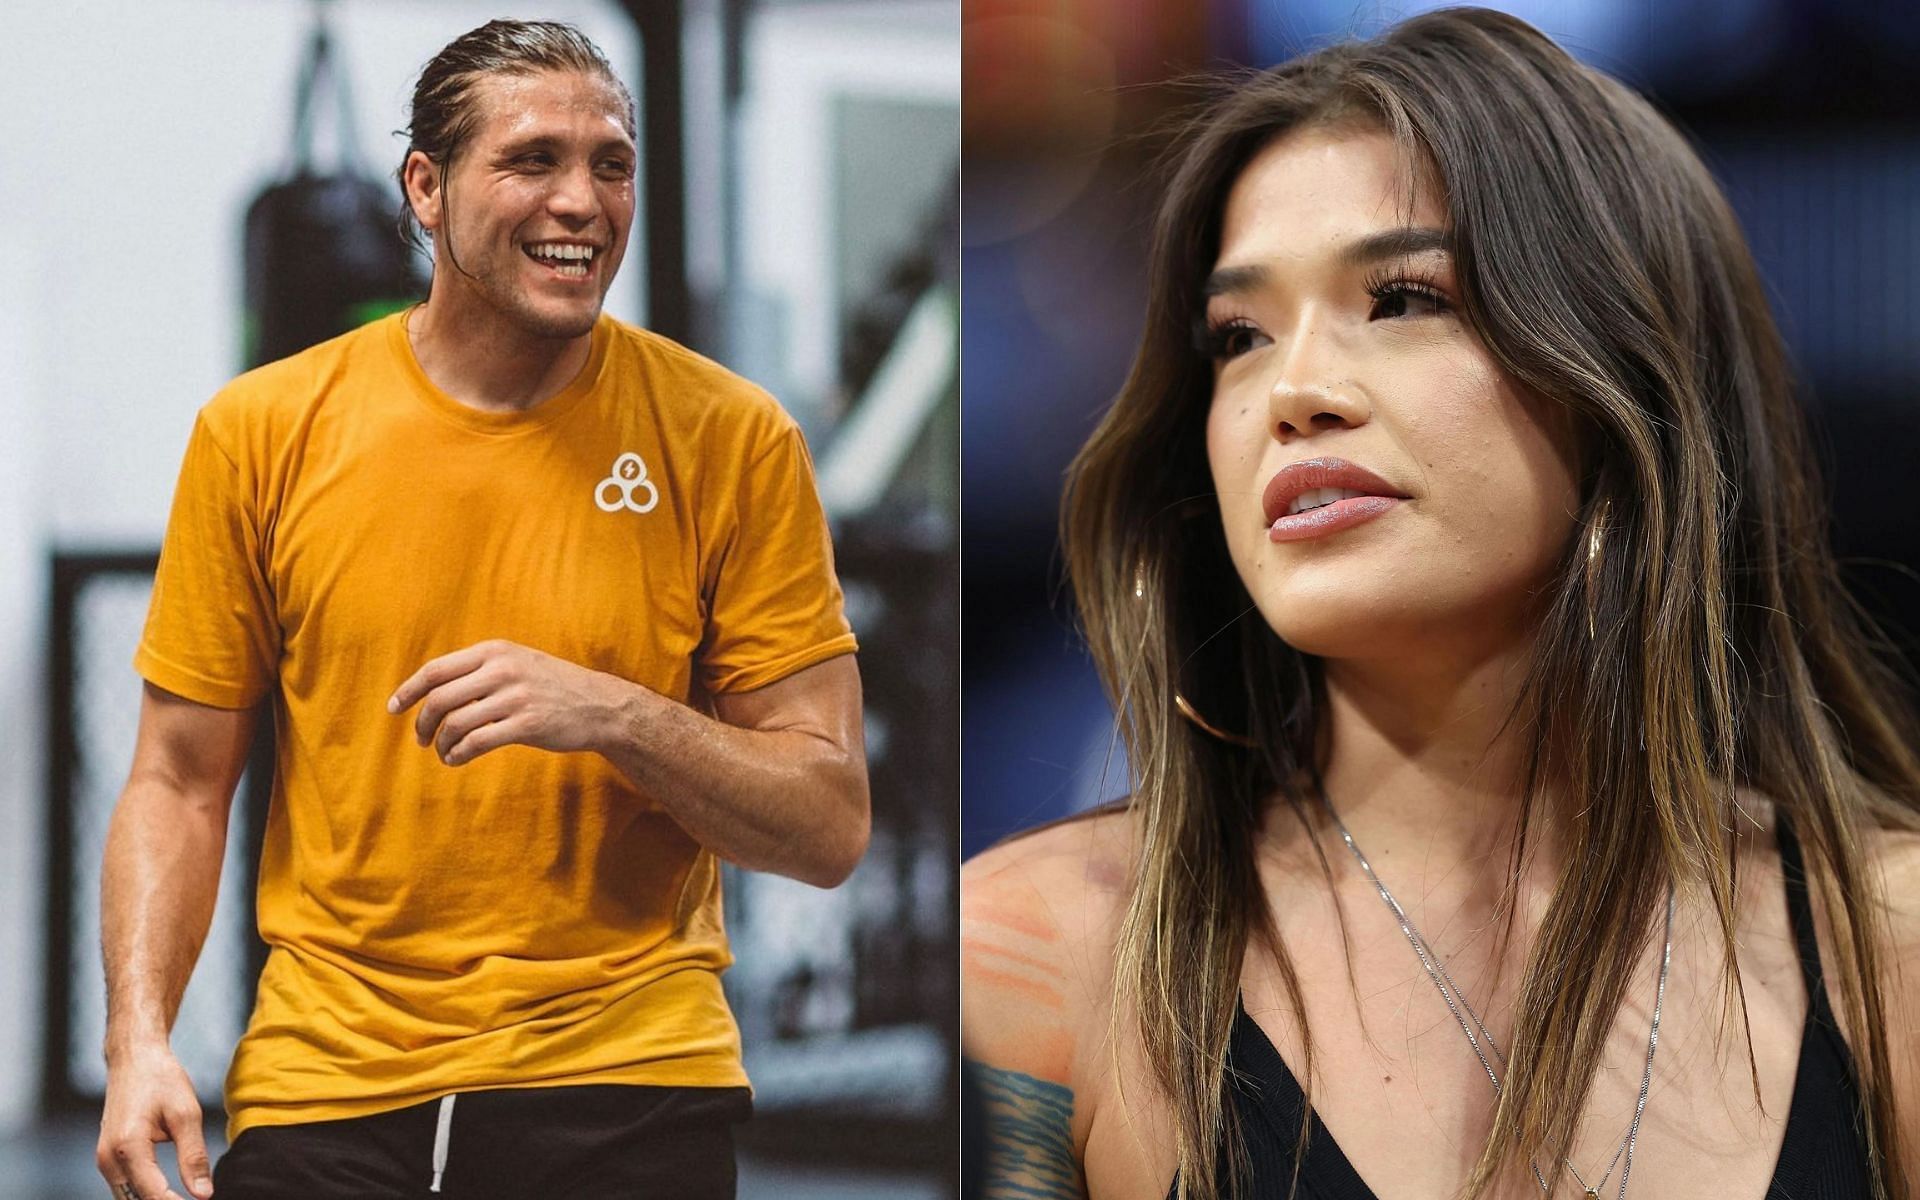 MMA fighters Brian Ortega (left) and Tracy Cortez (right) were in a relationship [Image credits: @briantcity on Instagram]